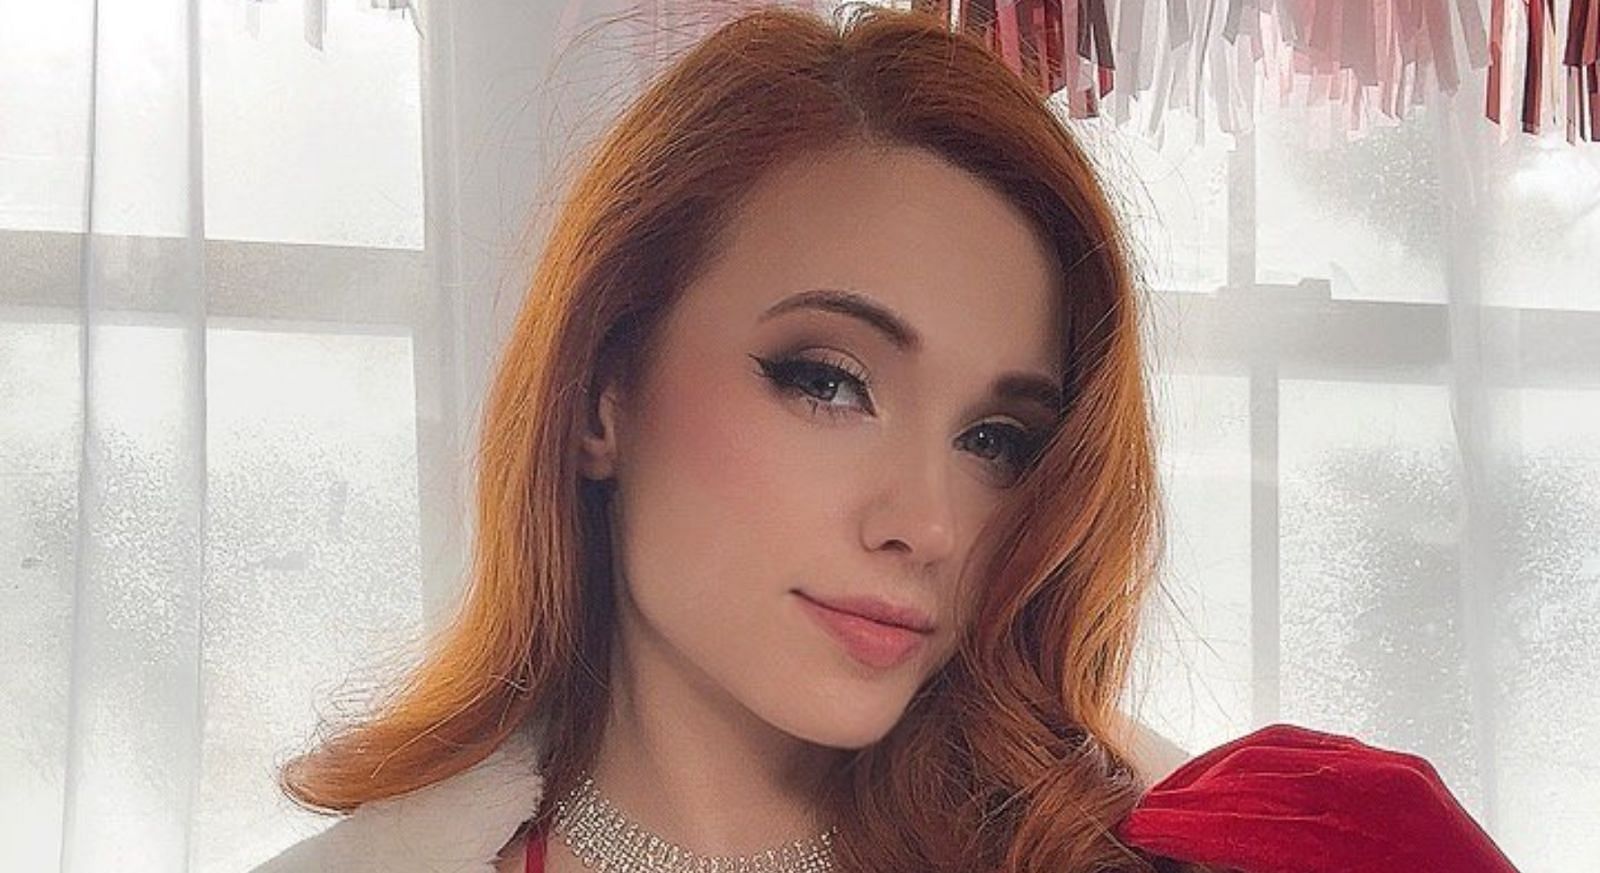 How old is Amouranth?